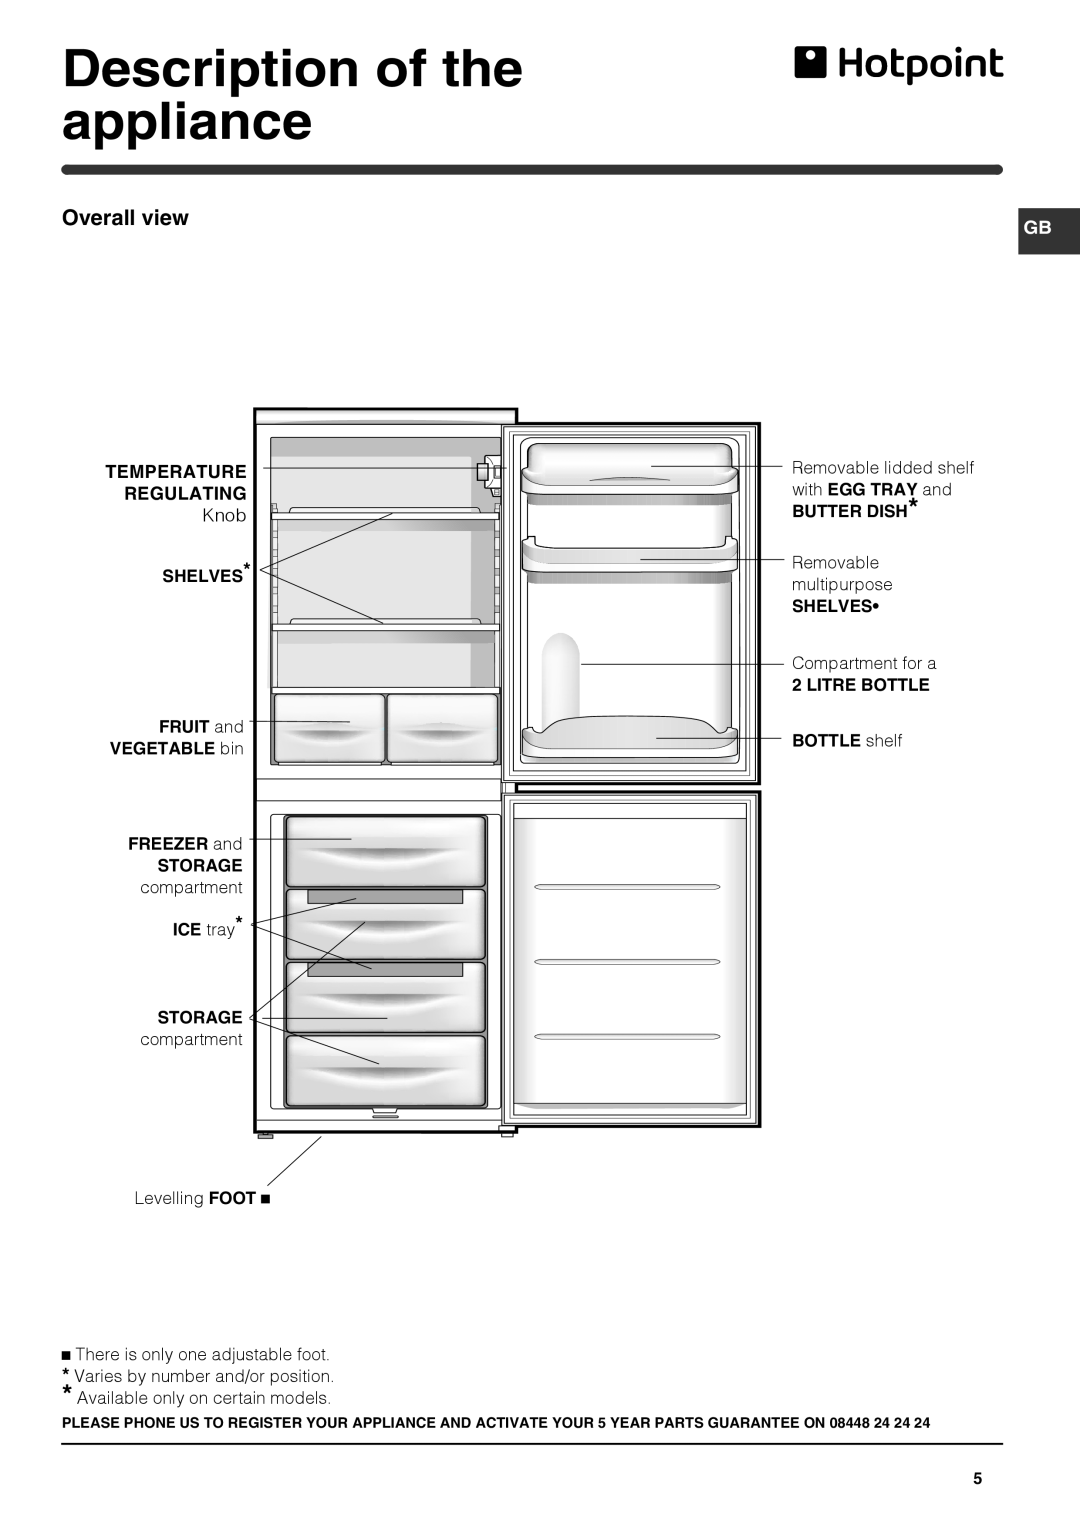 Hotpoint NRFAA50 x Description of the appliance, Overall view, Removable lidded shelf, Knob, multipurpose, compartment 